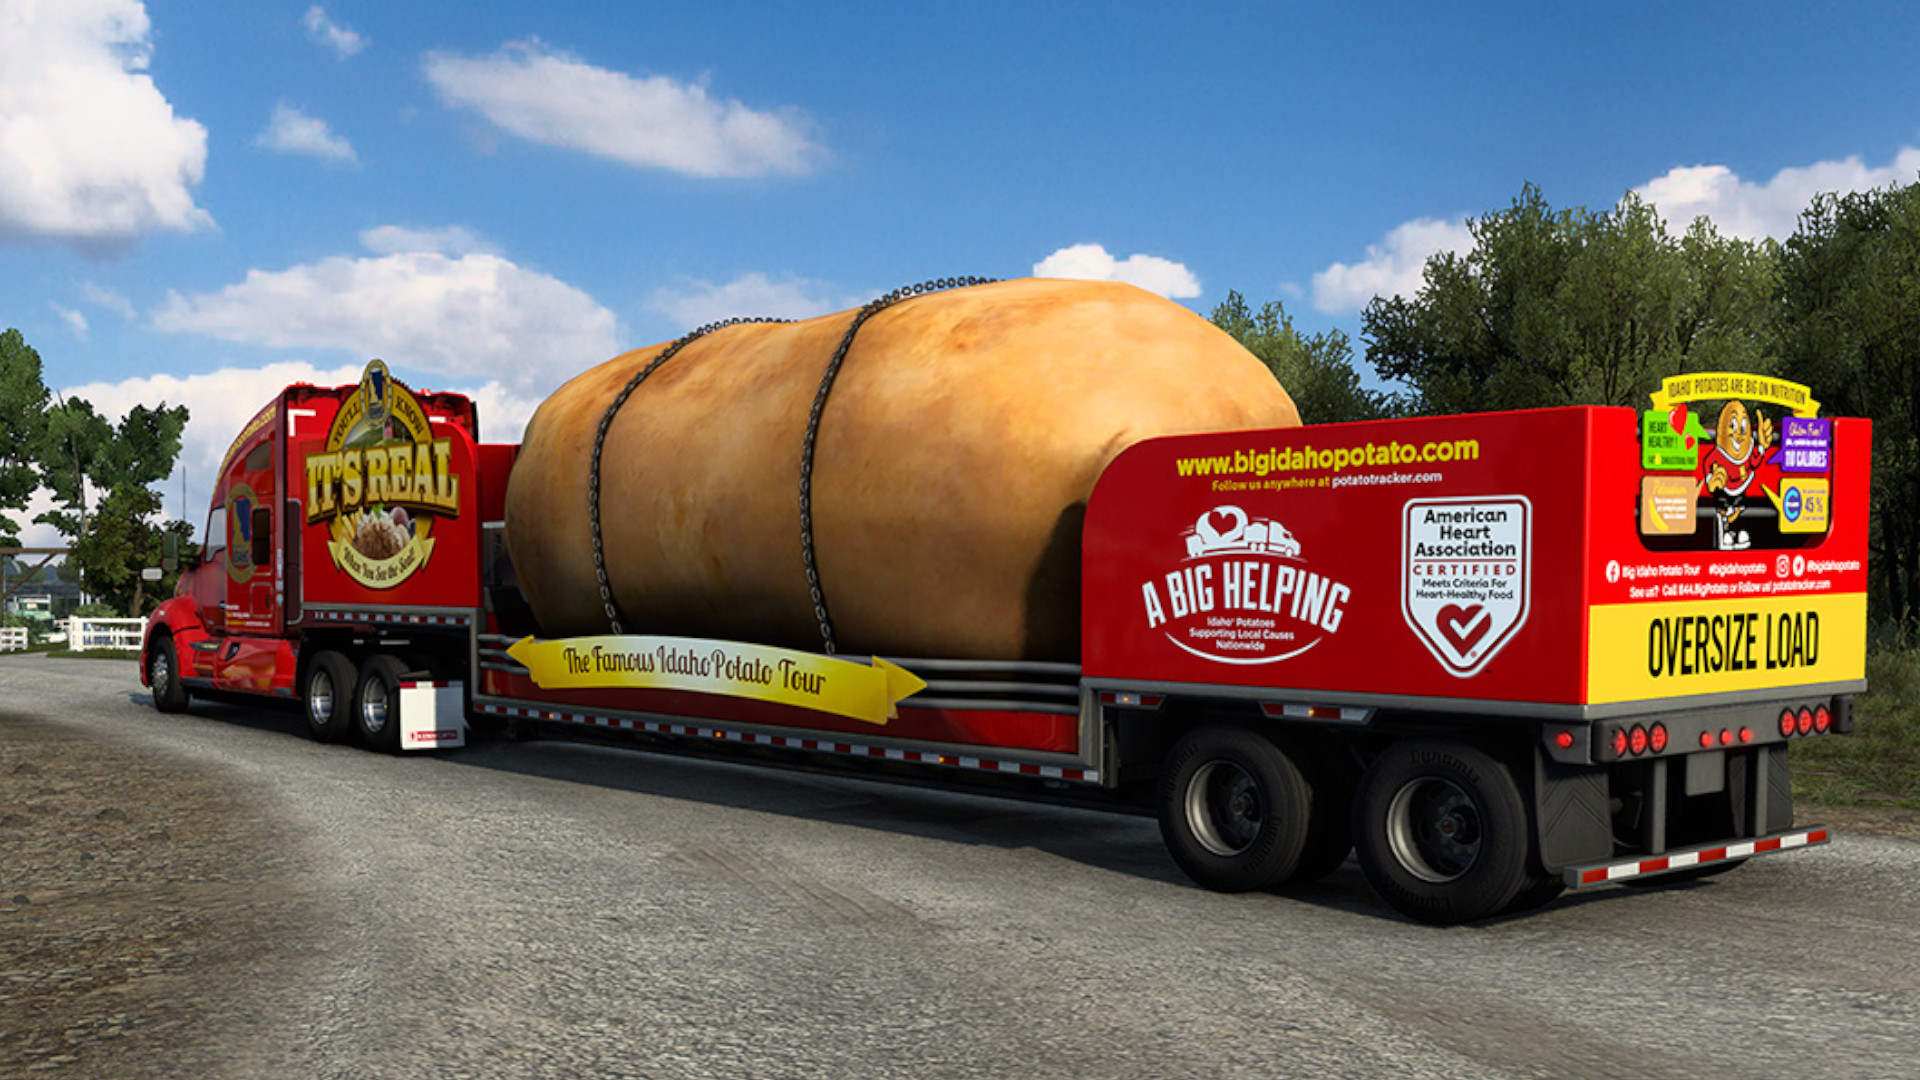 The latest American Truck Simulator event is about hauling a giant potato